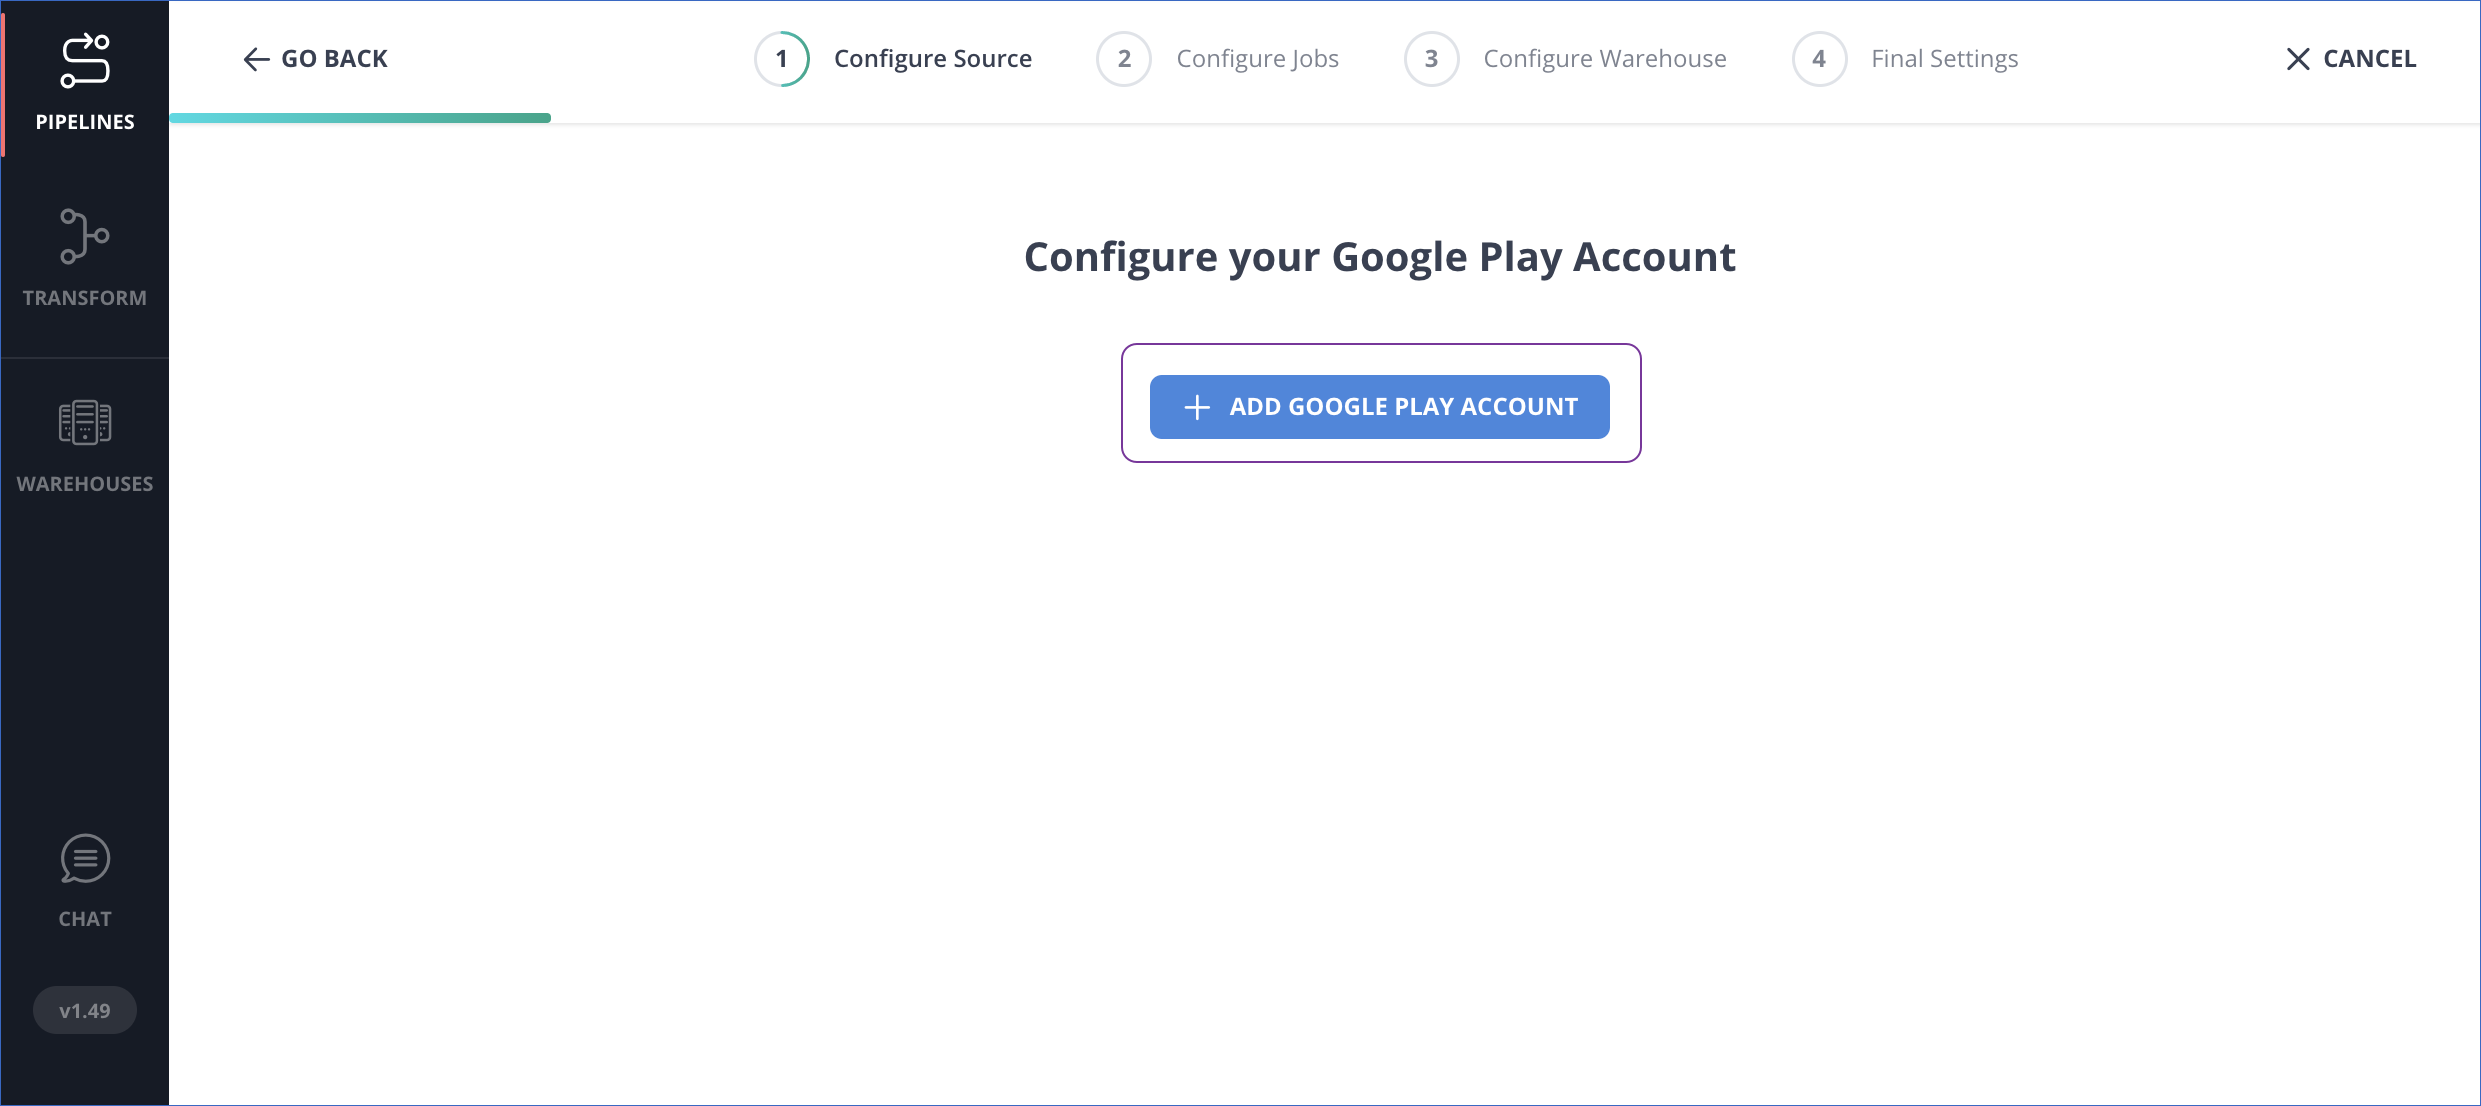 Google Play Console to Snowflake: Configure google play account